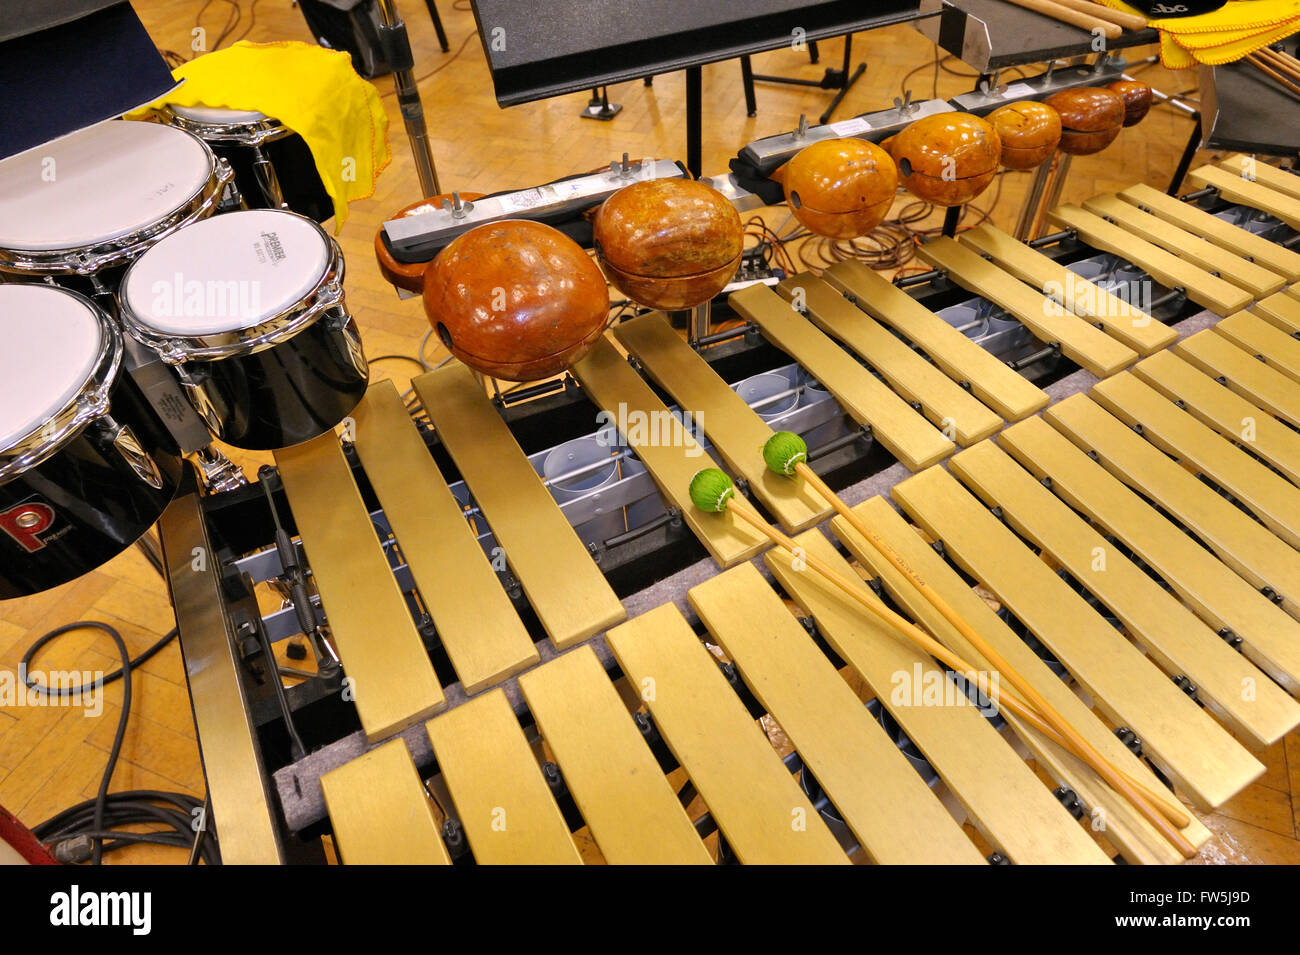 (seen with tom-toms, temple-blocks and beaters:) vibraphone, vibes, a percussion instrument struck with mallets. Similar in appearance to the xylophone and marimba, the vibraphone uses aluminum bars instead of wood. Each bar is paired with a resonator tube having a motor-driven butterfly valve at its upper end, mounted on a common shaft, to produce a tremolo or vibrato effect while spinning. The vibraphone also has a sustain pedal: when the pedal is up, the bars are all damped and the sound of each bar is quite short, with the pedal down, they will sound for several seconds. Frequently used in Stock Photo